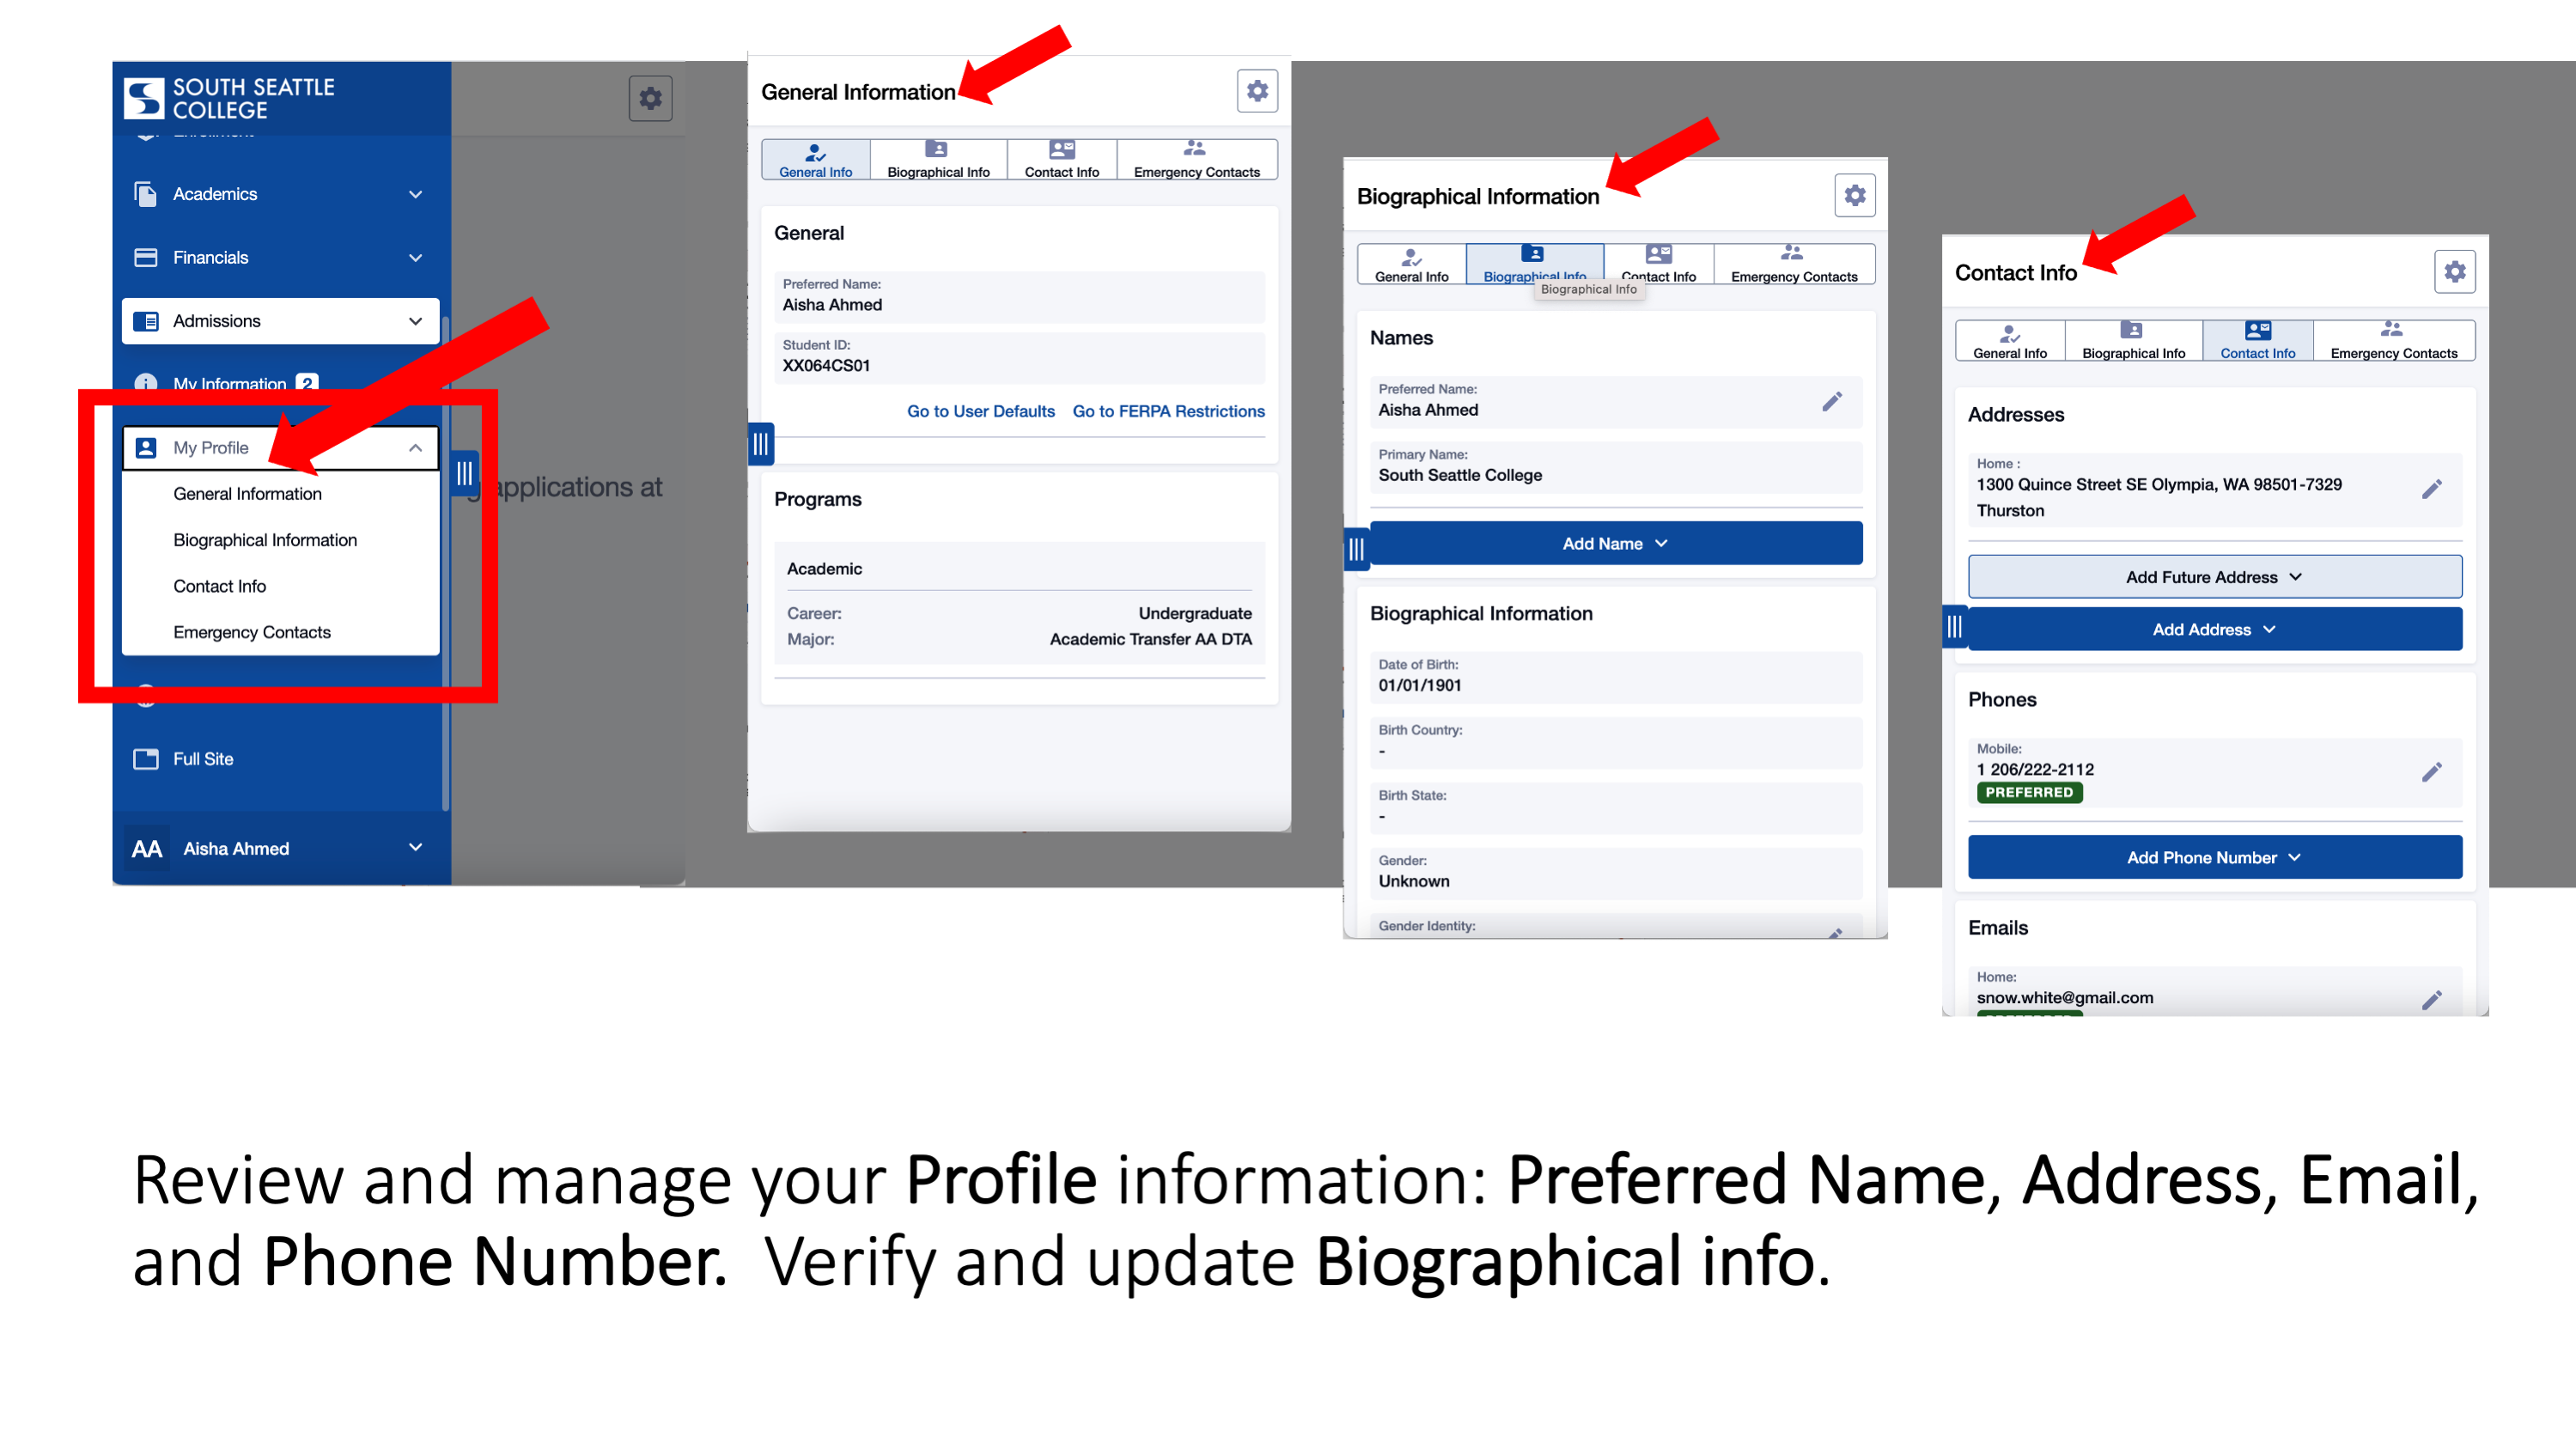 Review and manage your Profile information: Preferred Name, Address, Email, and Phone Number.  Verify and update Biographical info.